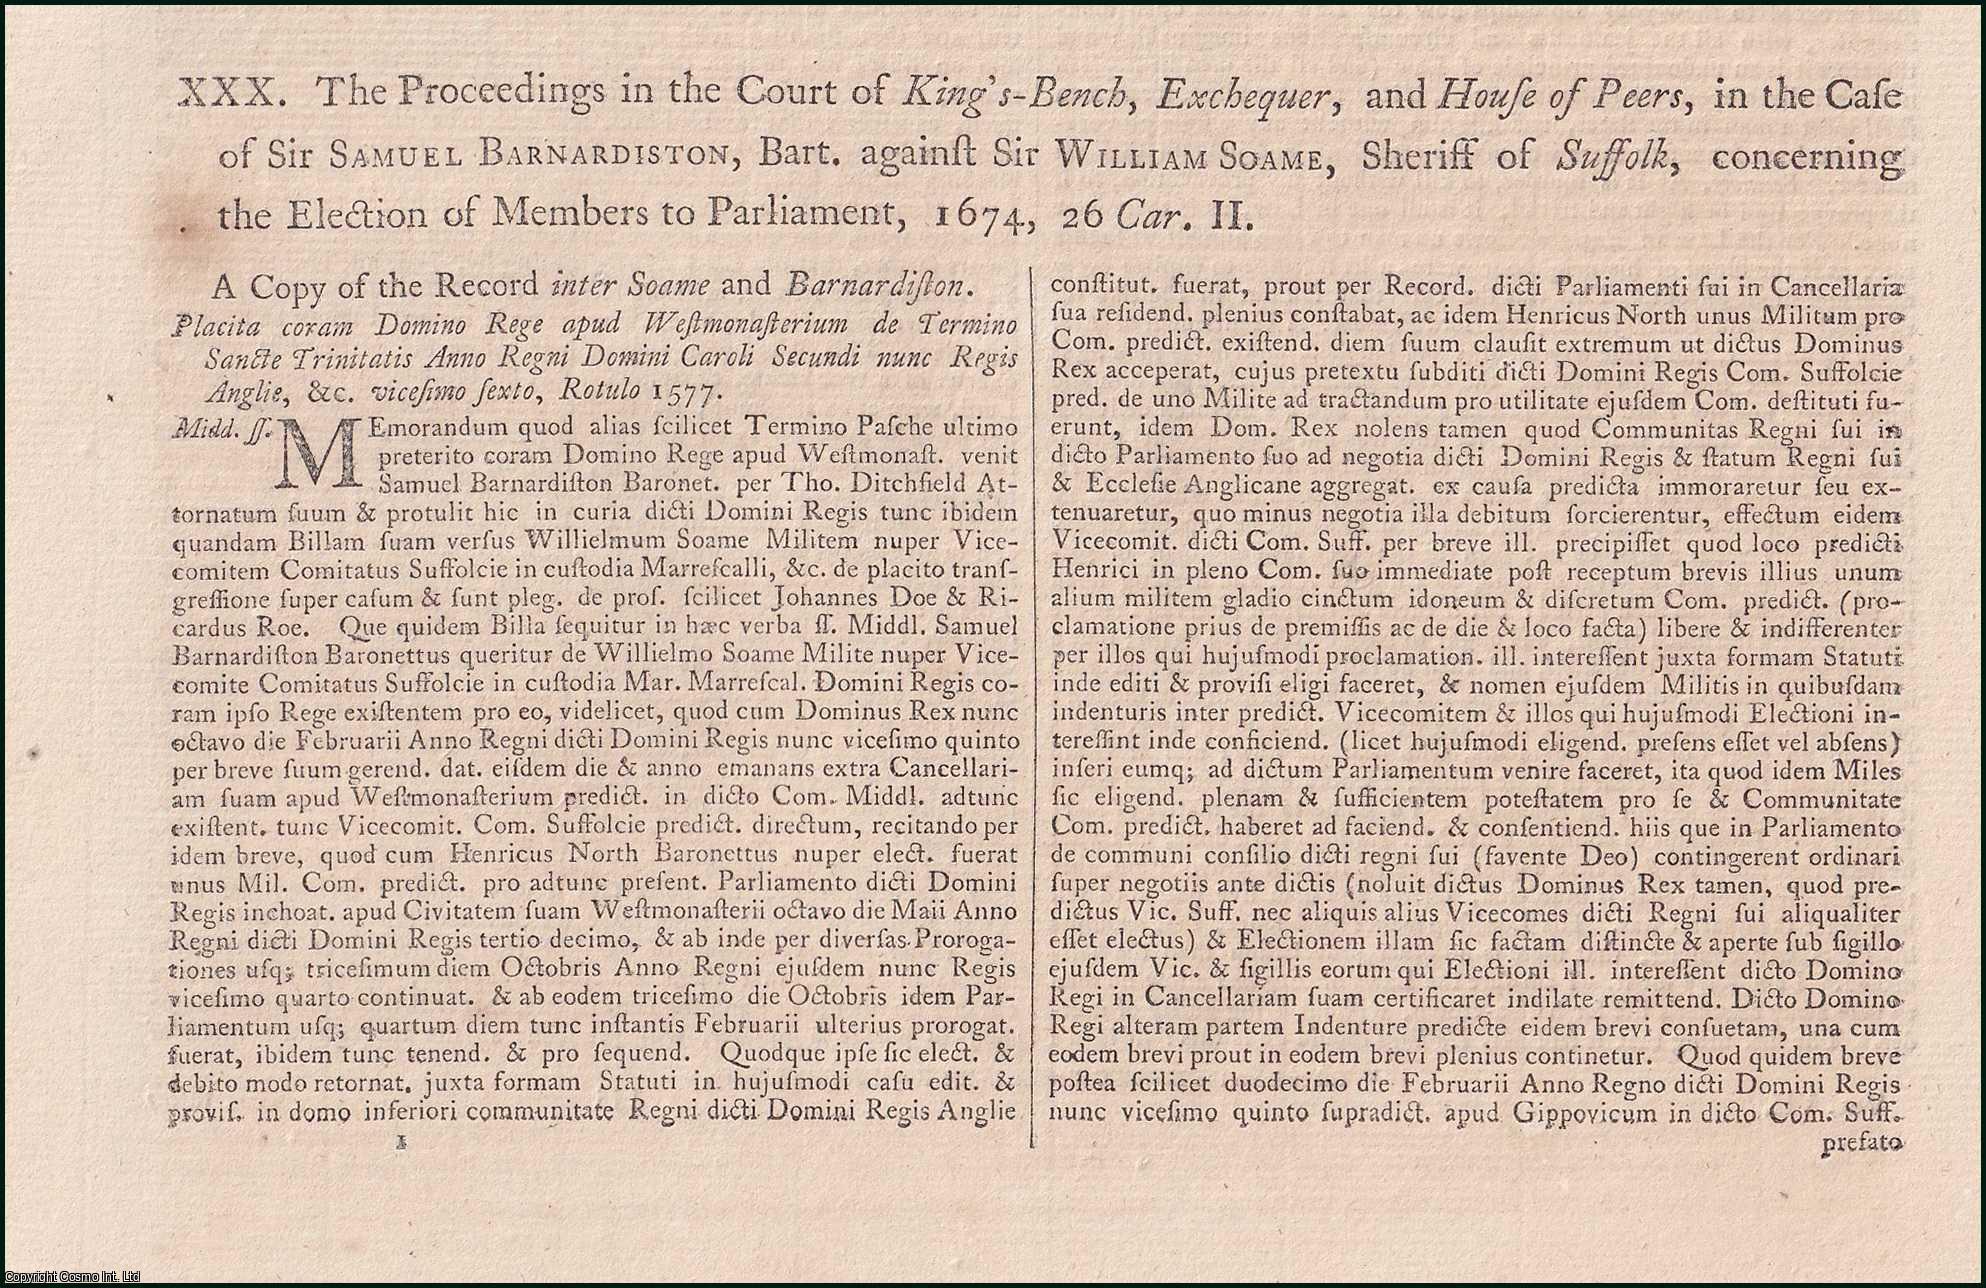 [Trial]. - The Proceedings in the Court of King's-Bench, Exchequer, and House of Peers, in the Case of Sir Samuel Barnardiston, Bart. against Sir William Soame, Sheriff of Suffolk, concerning the Election of Members to Parliament, 1674. An original report from the Collected State Trials.